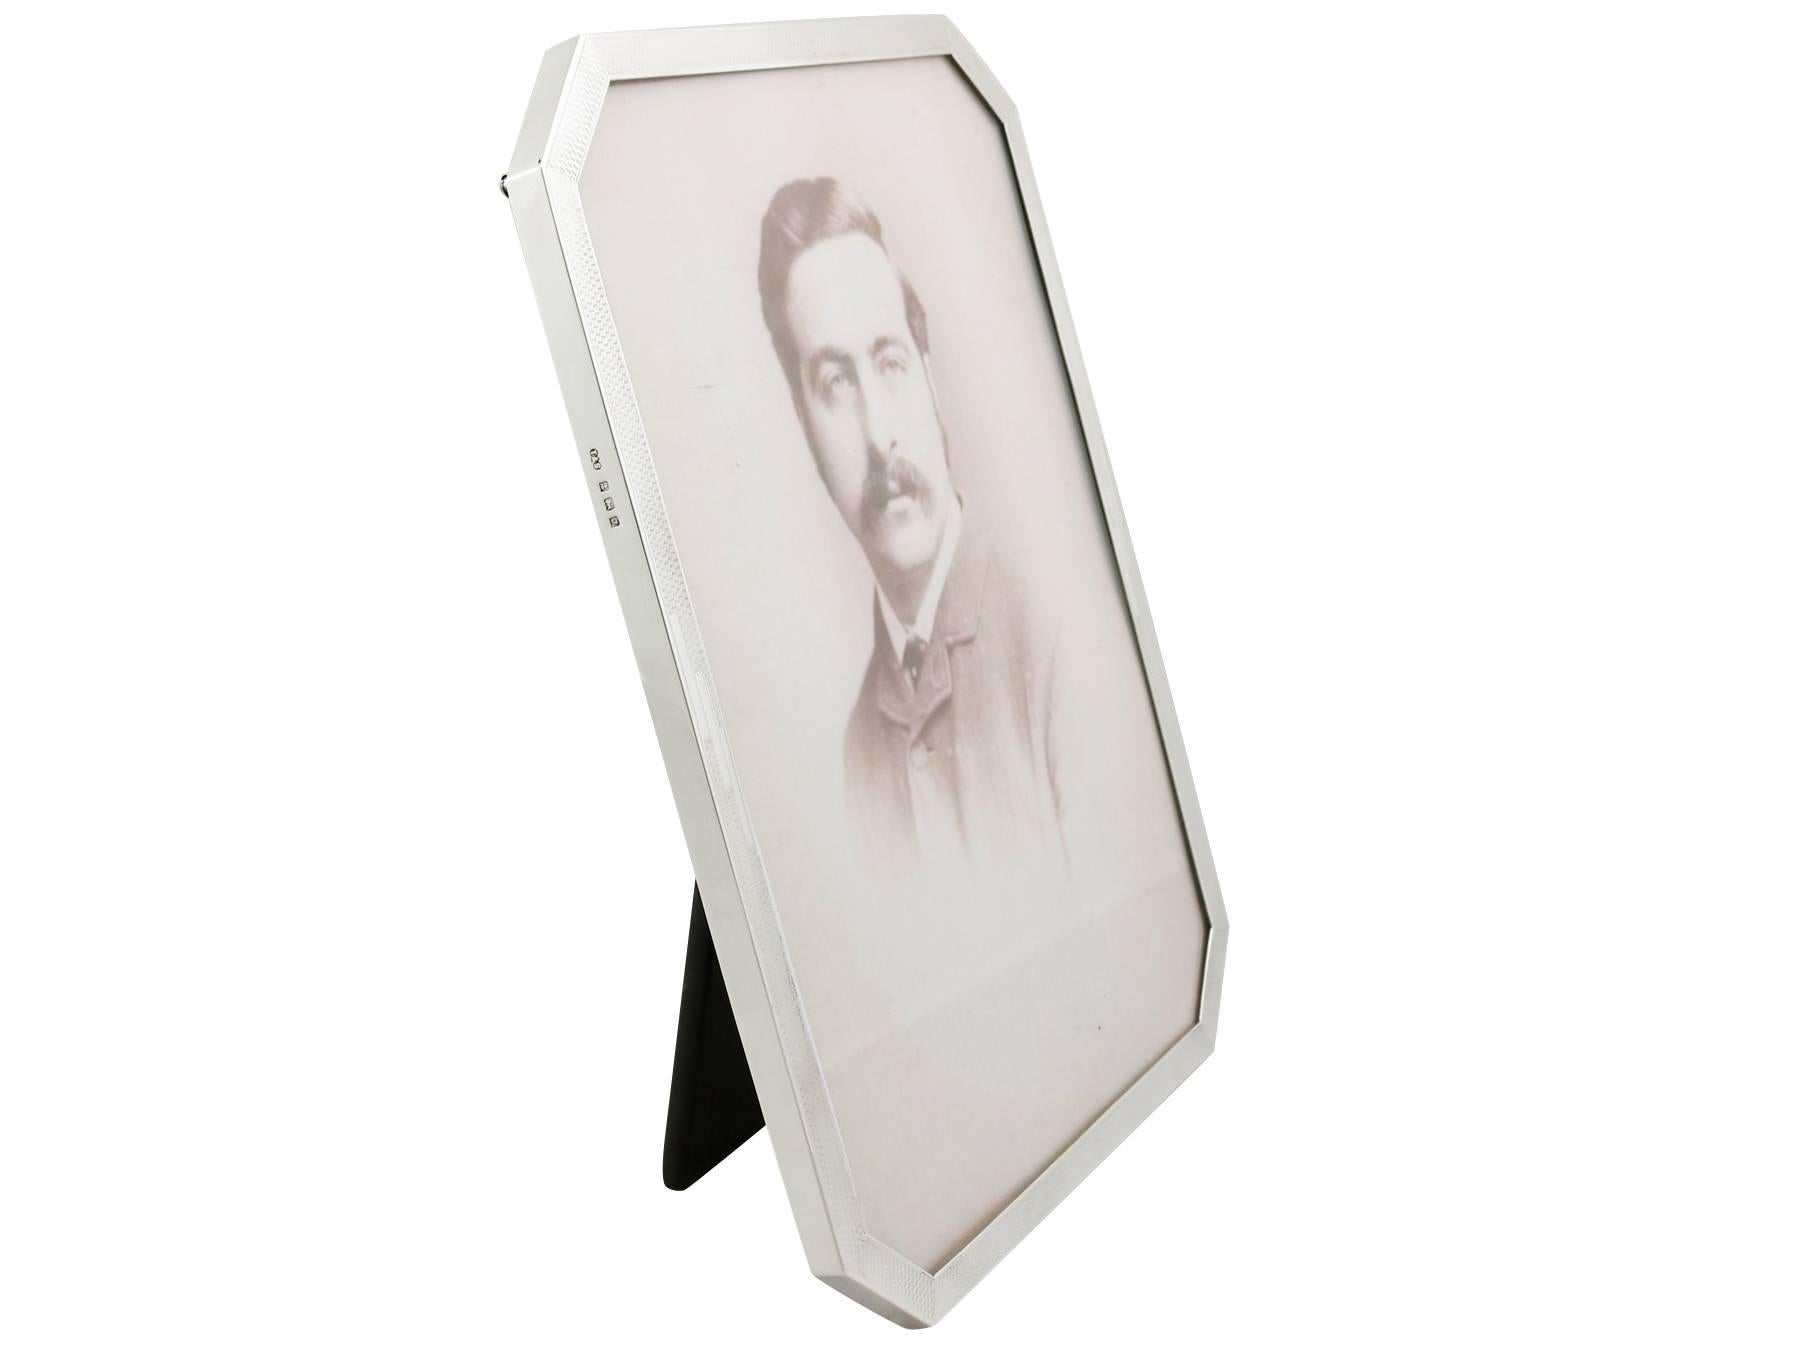 An exceptional, fine and impressive antique George V English sterling silver photograph frame in the Art Deco style; an addition to our collection of ornamental silverware.

This exceptional antique George V sterling silver photograph frame has a